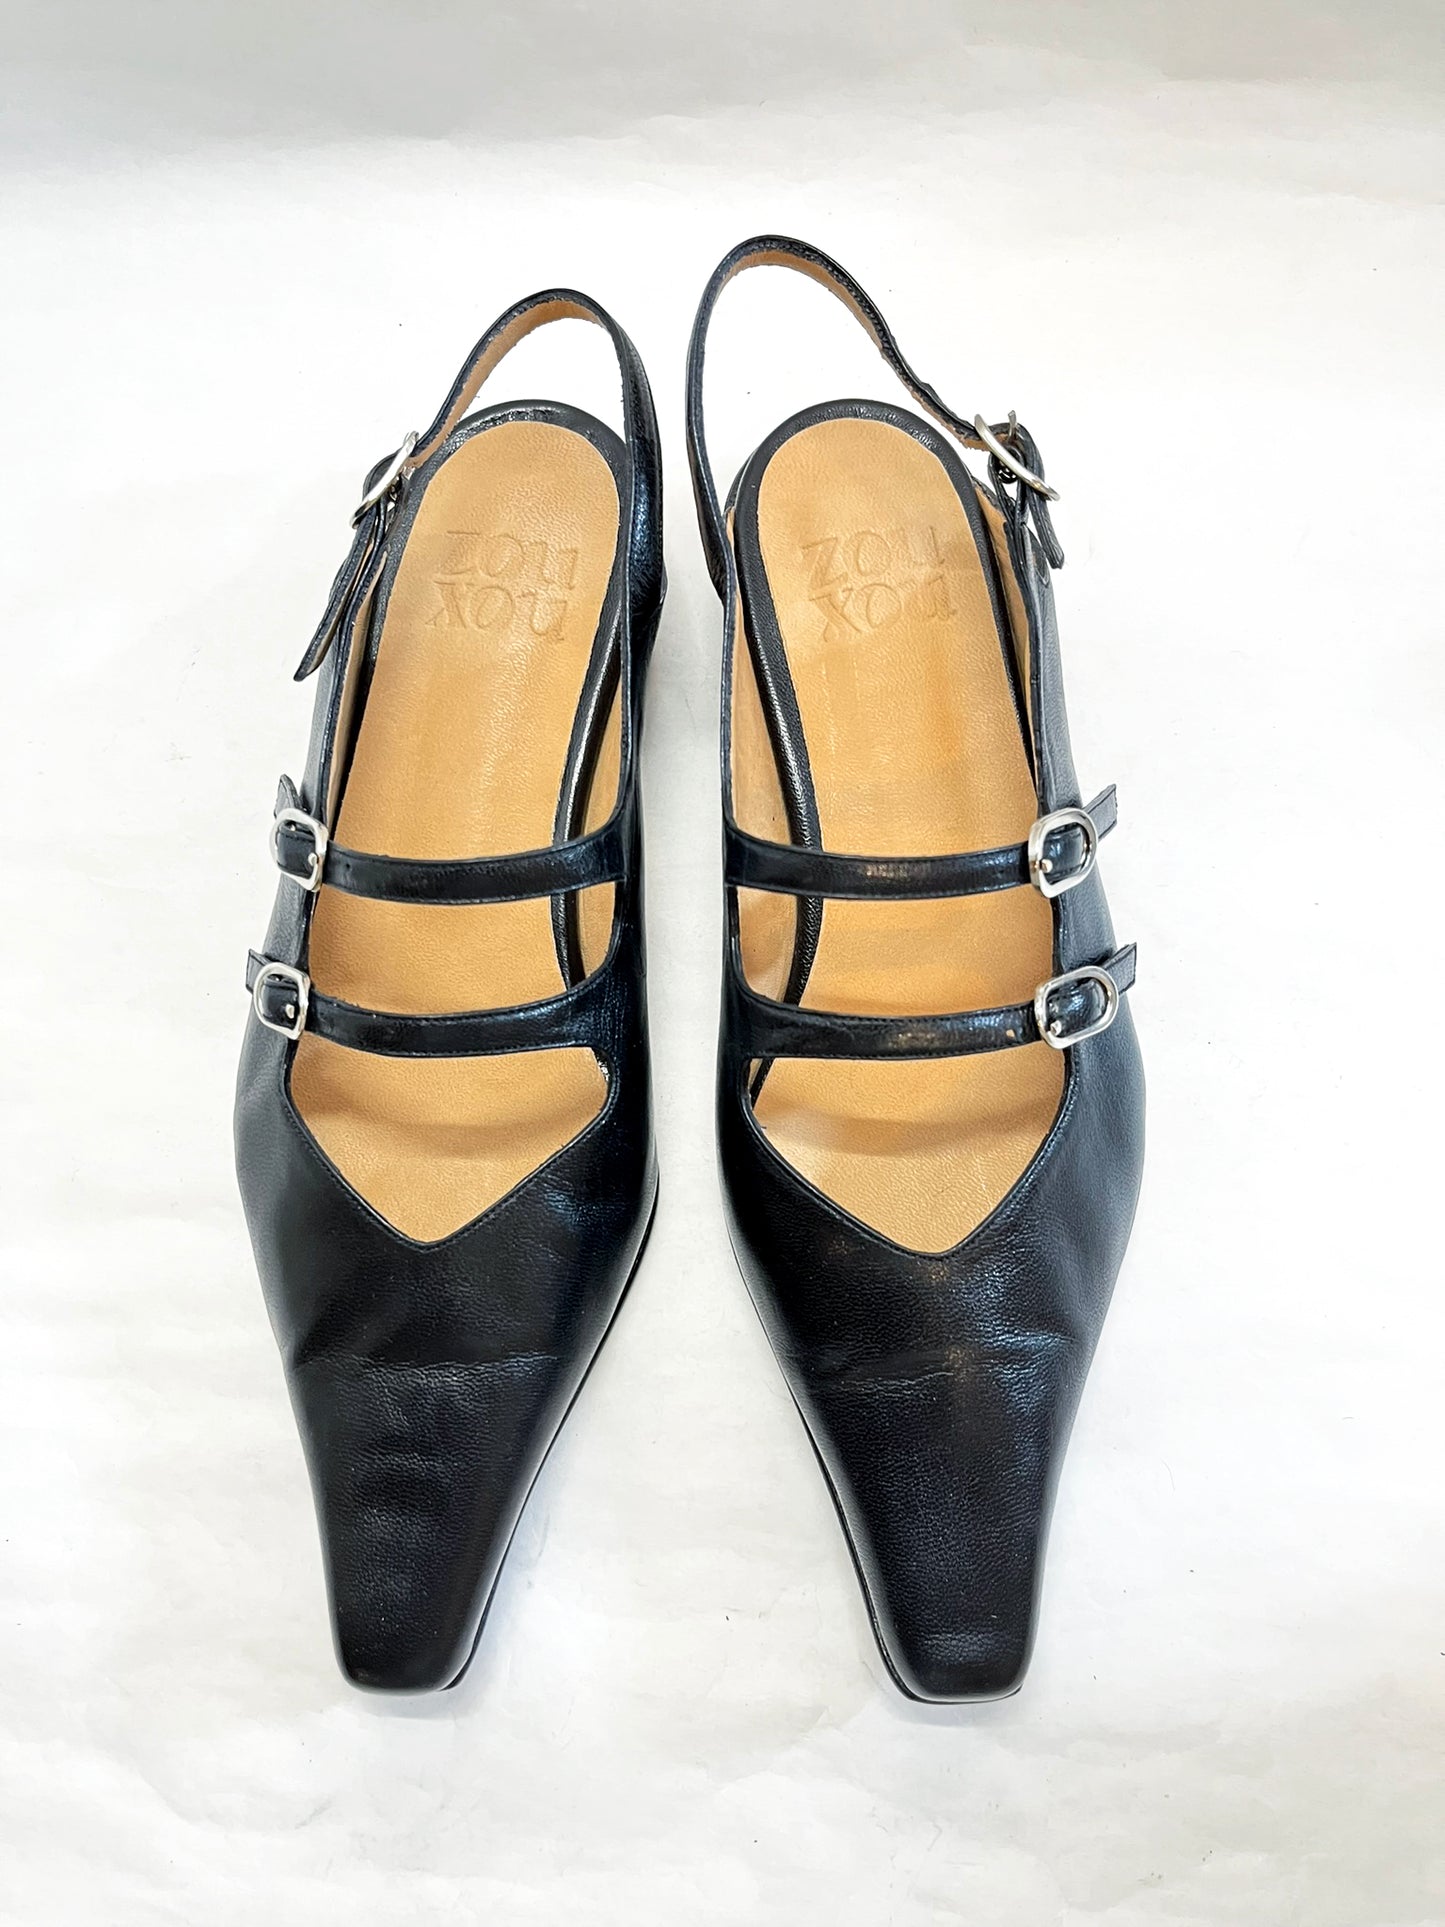 Cata Buckle Flat in Black Size 36